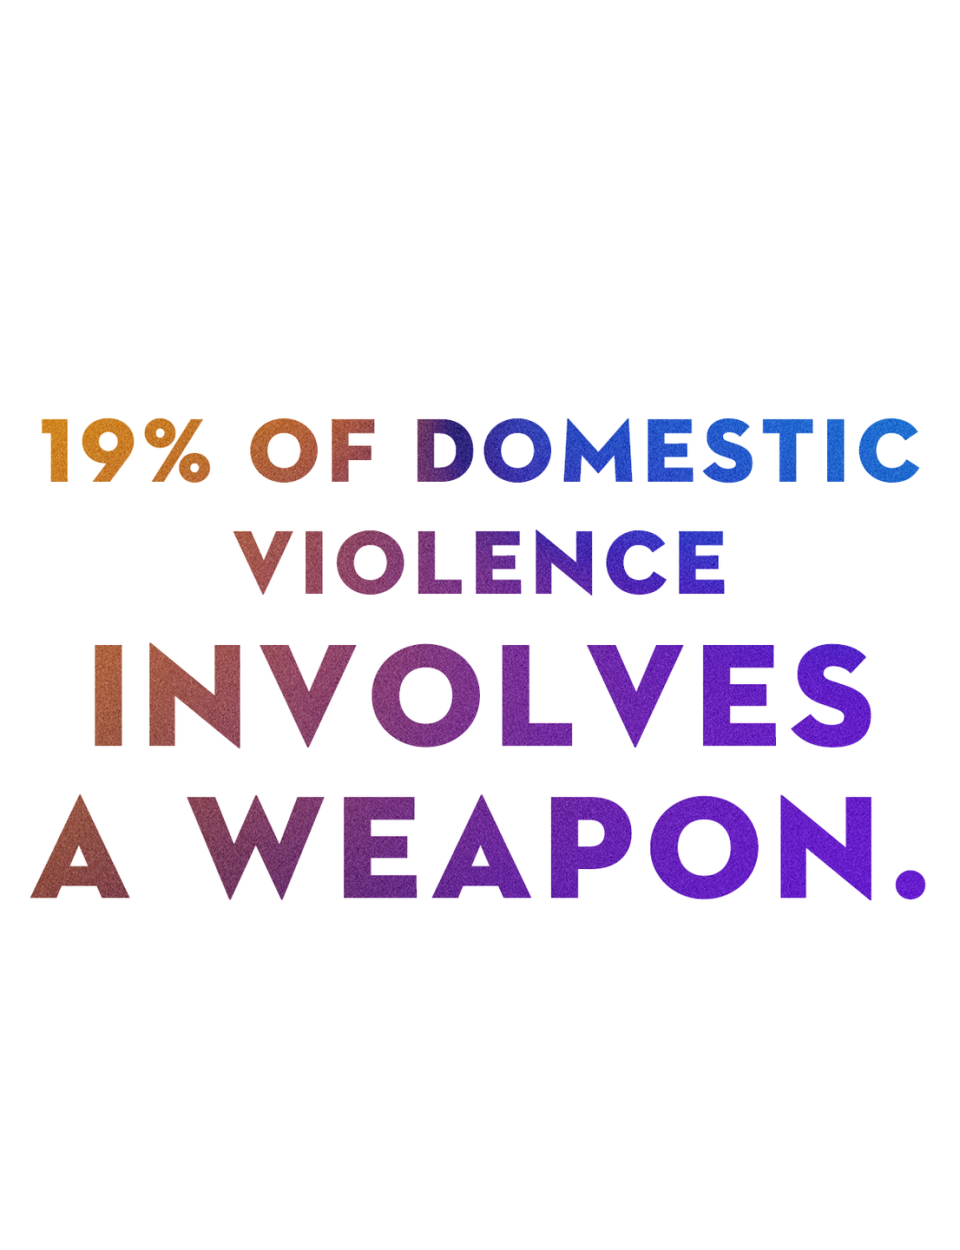 19 percent of domestic violence involves a weapon